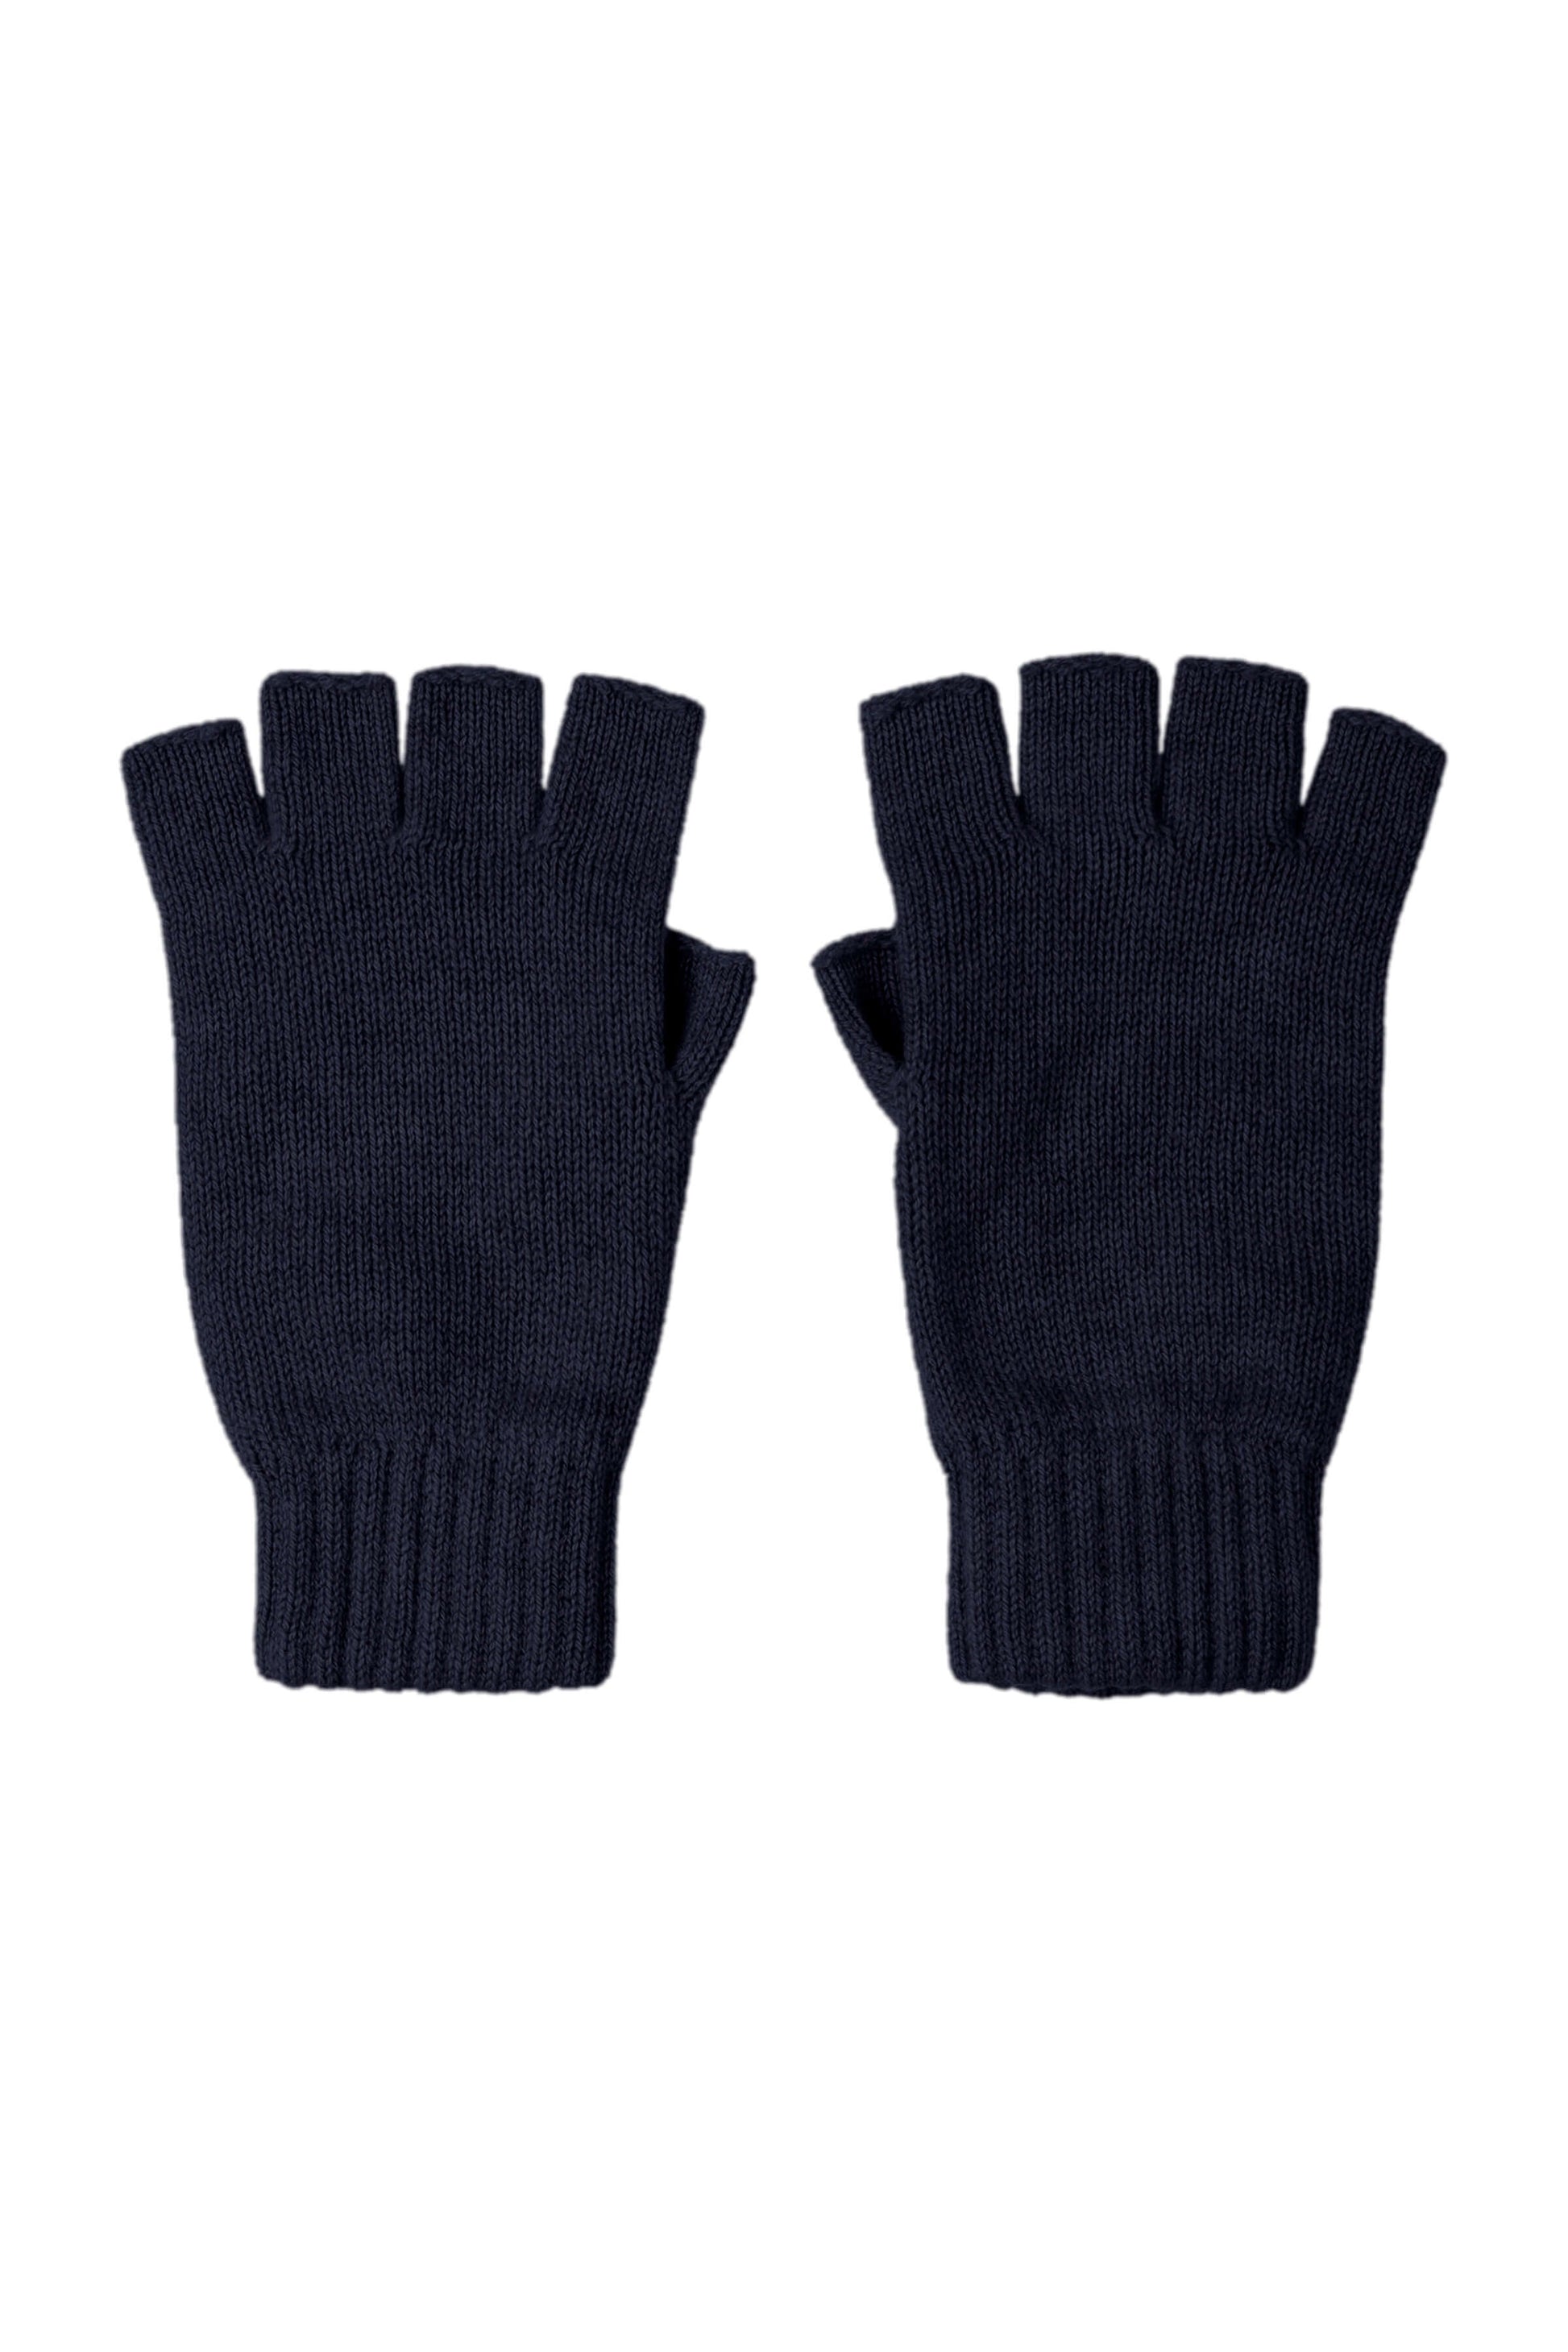 Johnstons of Elgin AW24 Knitted Accessory Navy Women's Fingerless Cashmere Gloves HAY02223SD0707N/A